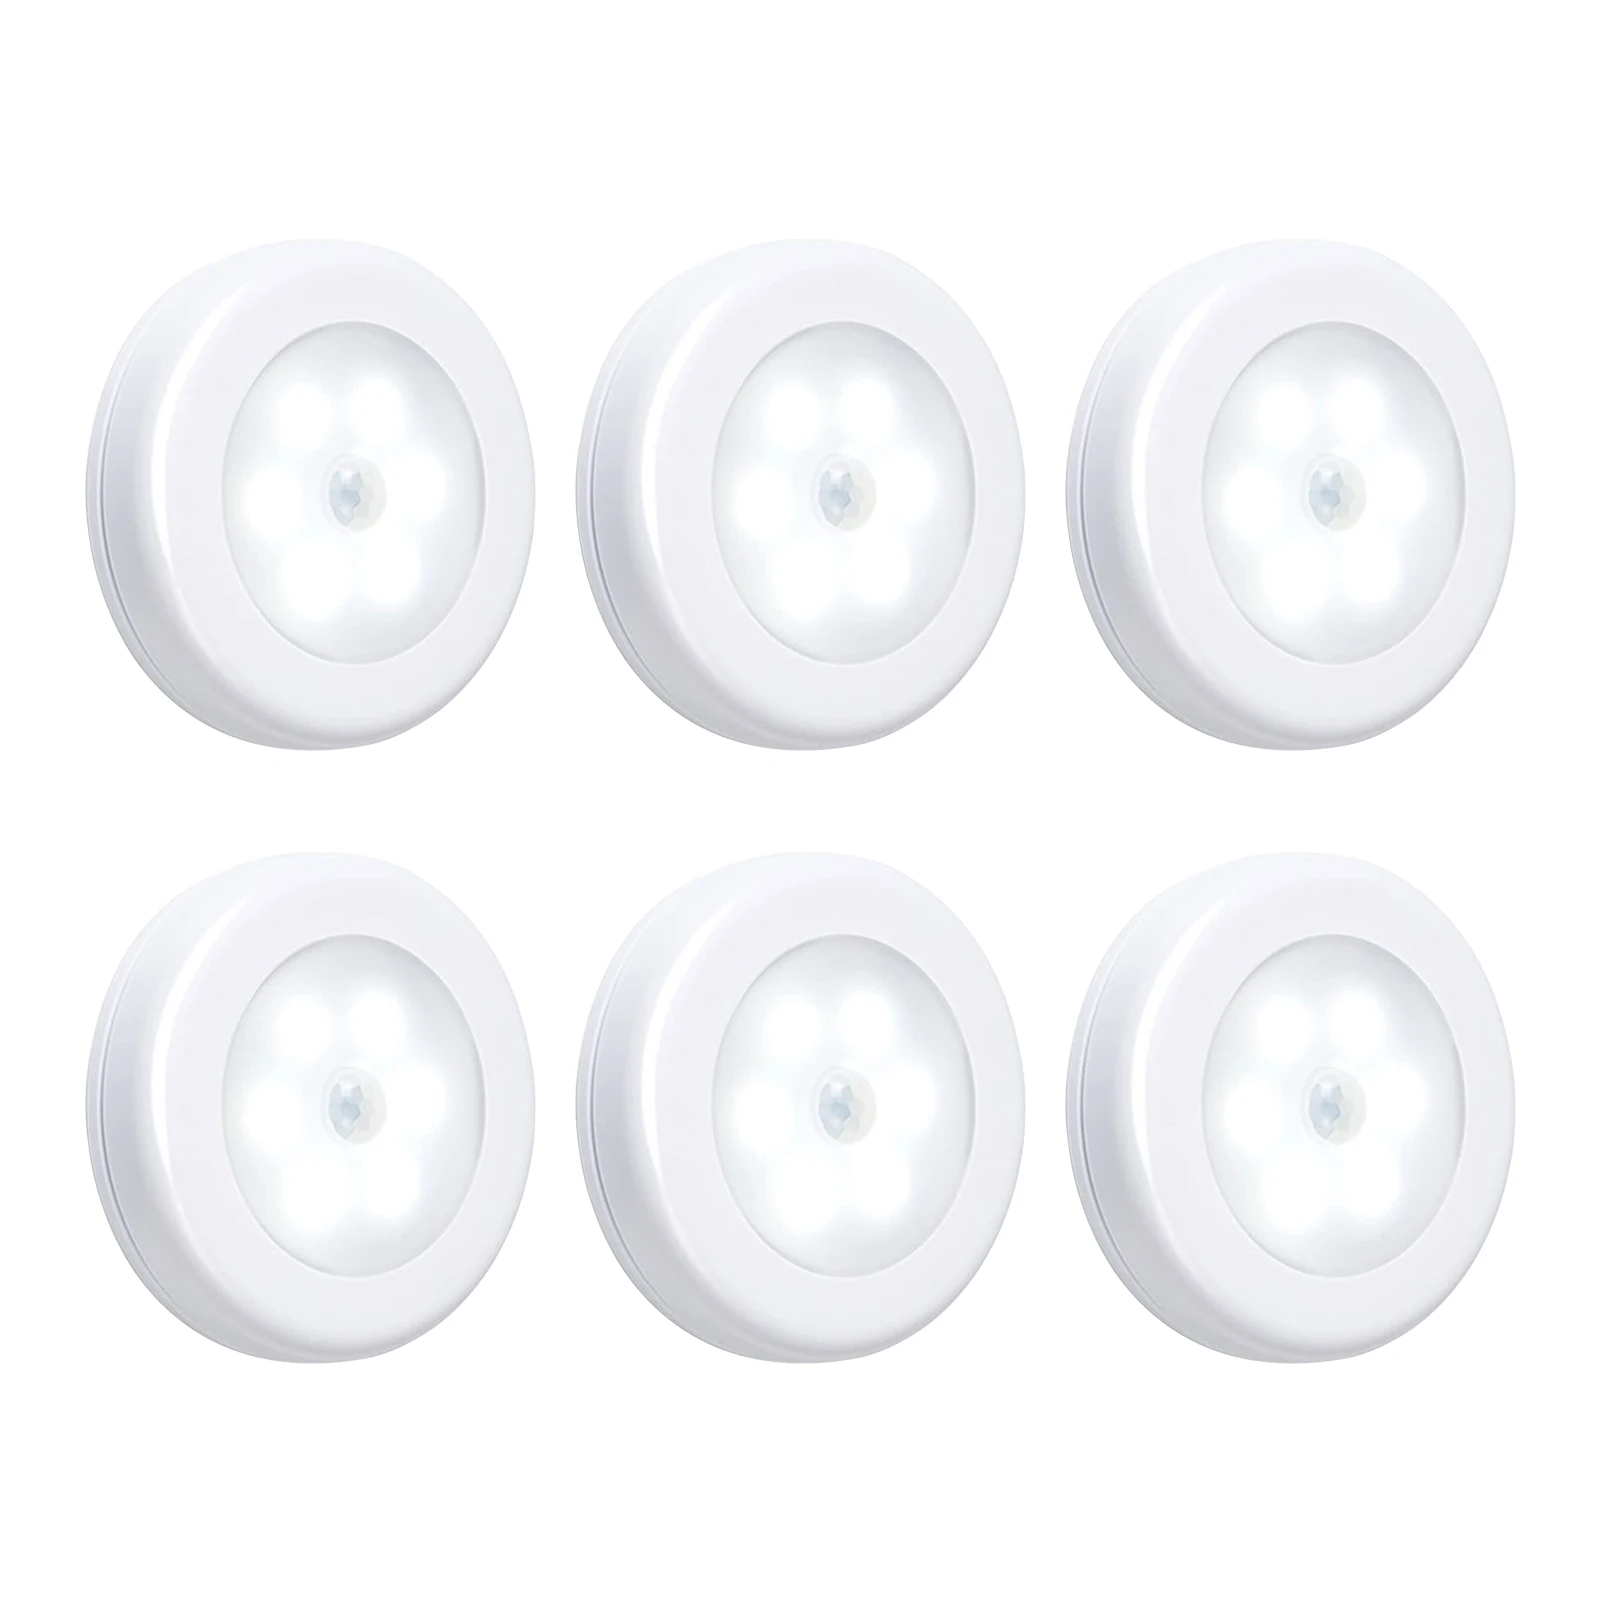 

6pcs Wireless Round Battery Powered Stair Closet Home Bedroom LED Cabinet Light Motion Sensor With Sticker Balcony Hallway